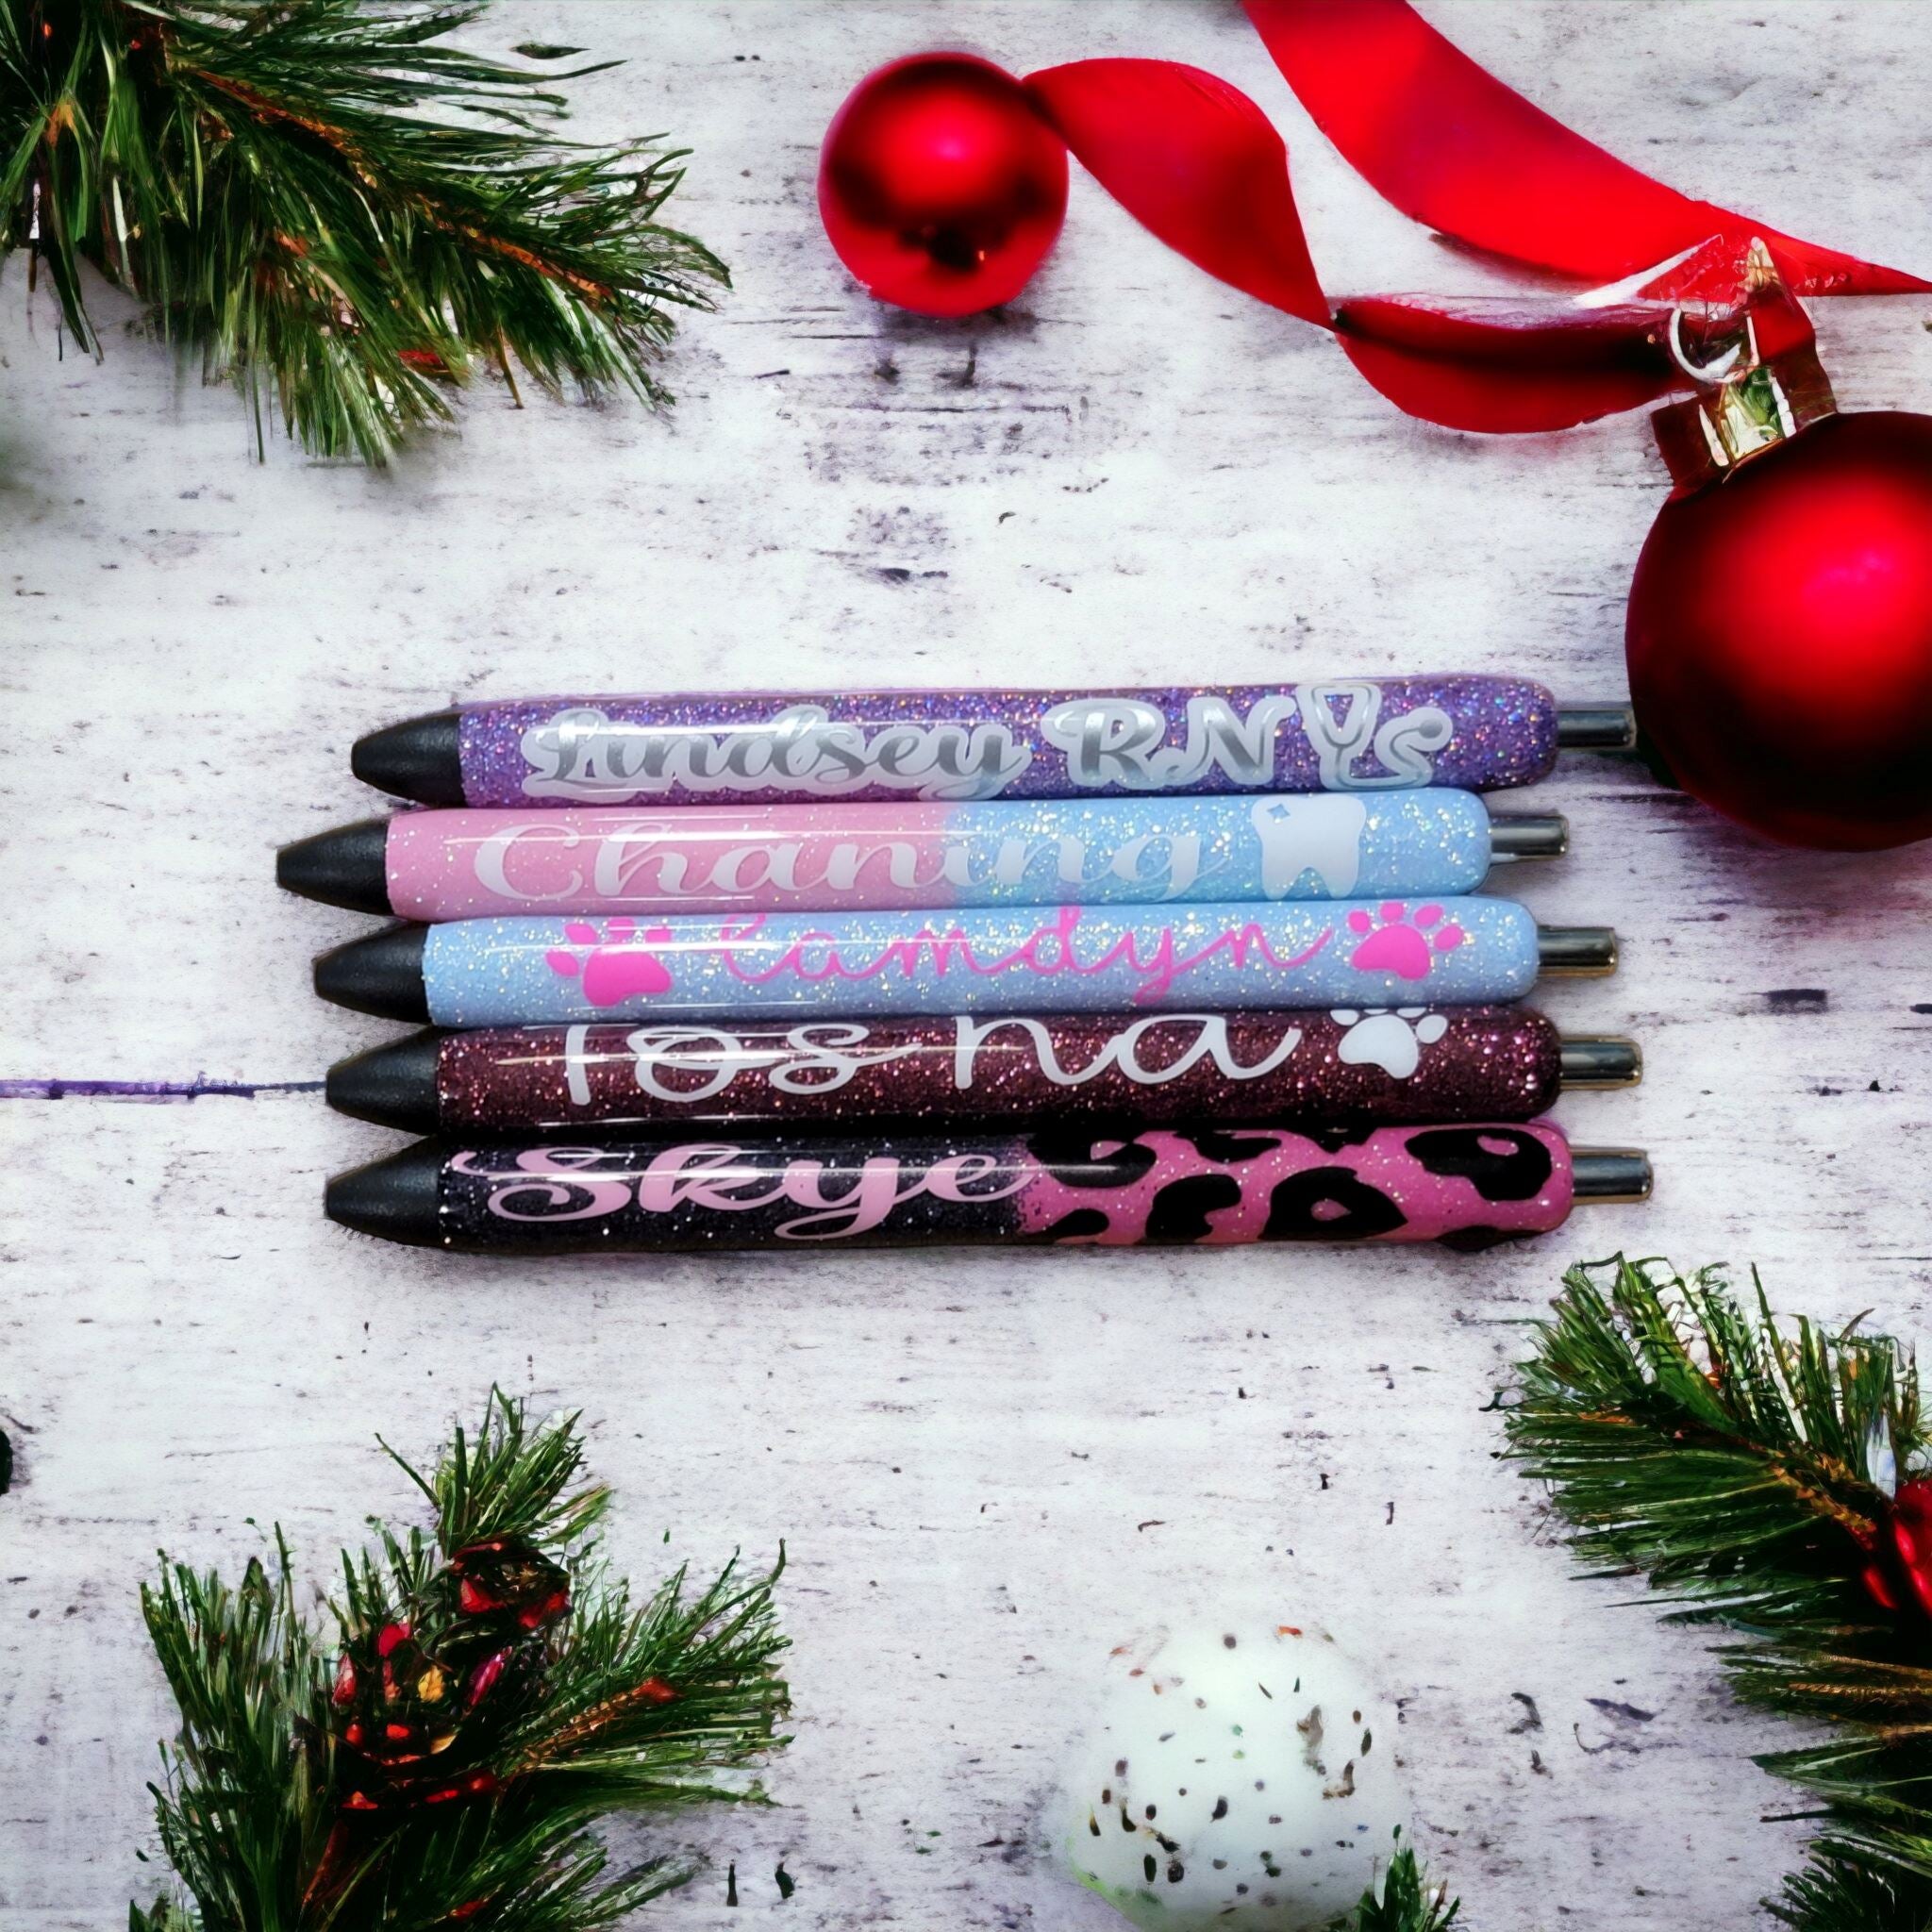 Glitter pens, funny saying pens, patriotic funny pens, gag gift, stocking  stuffers, Christmas ideas, holidays 2021